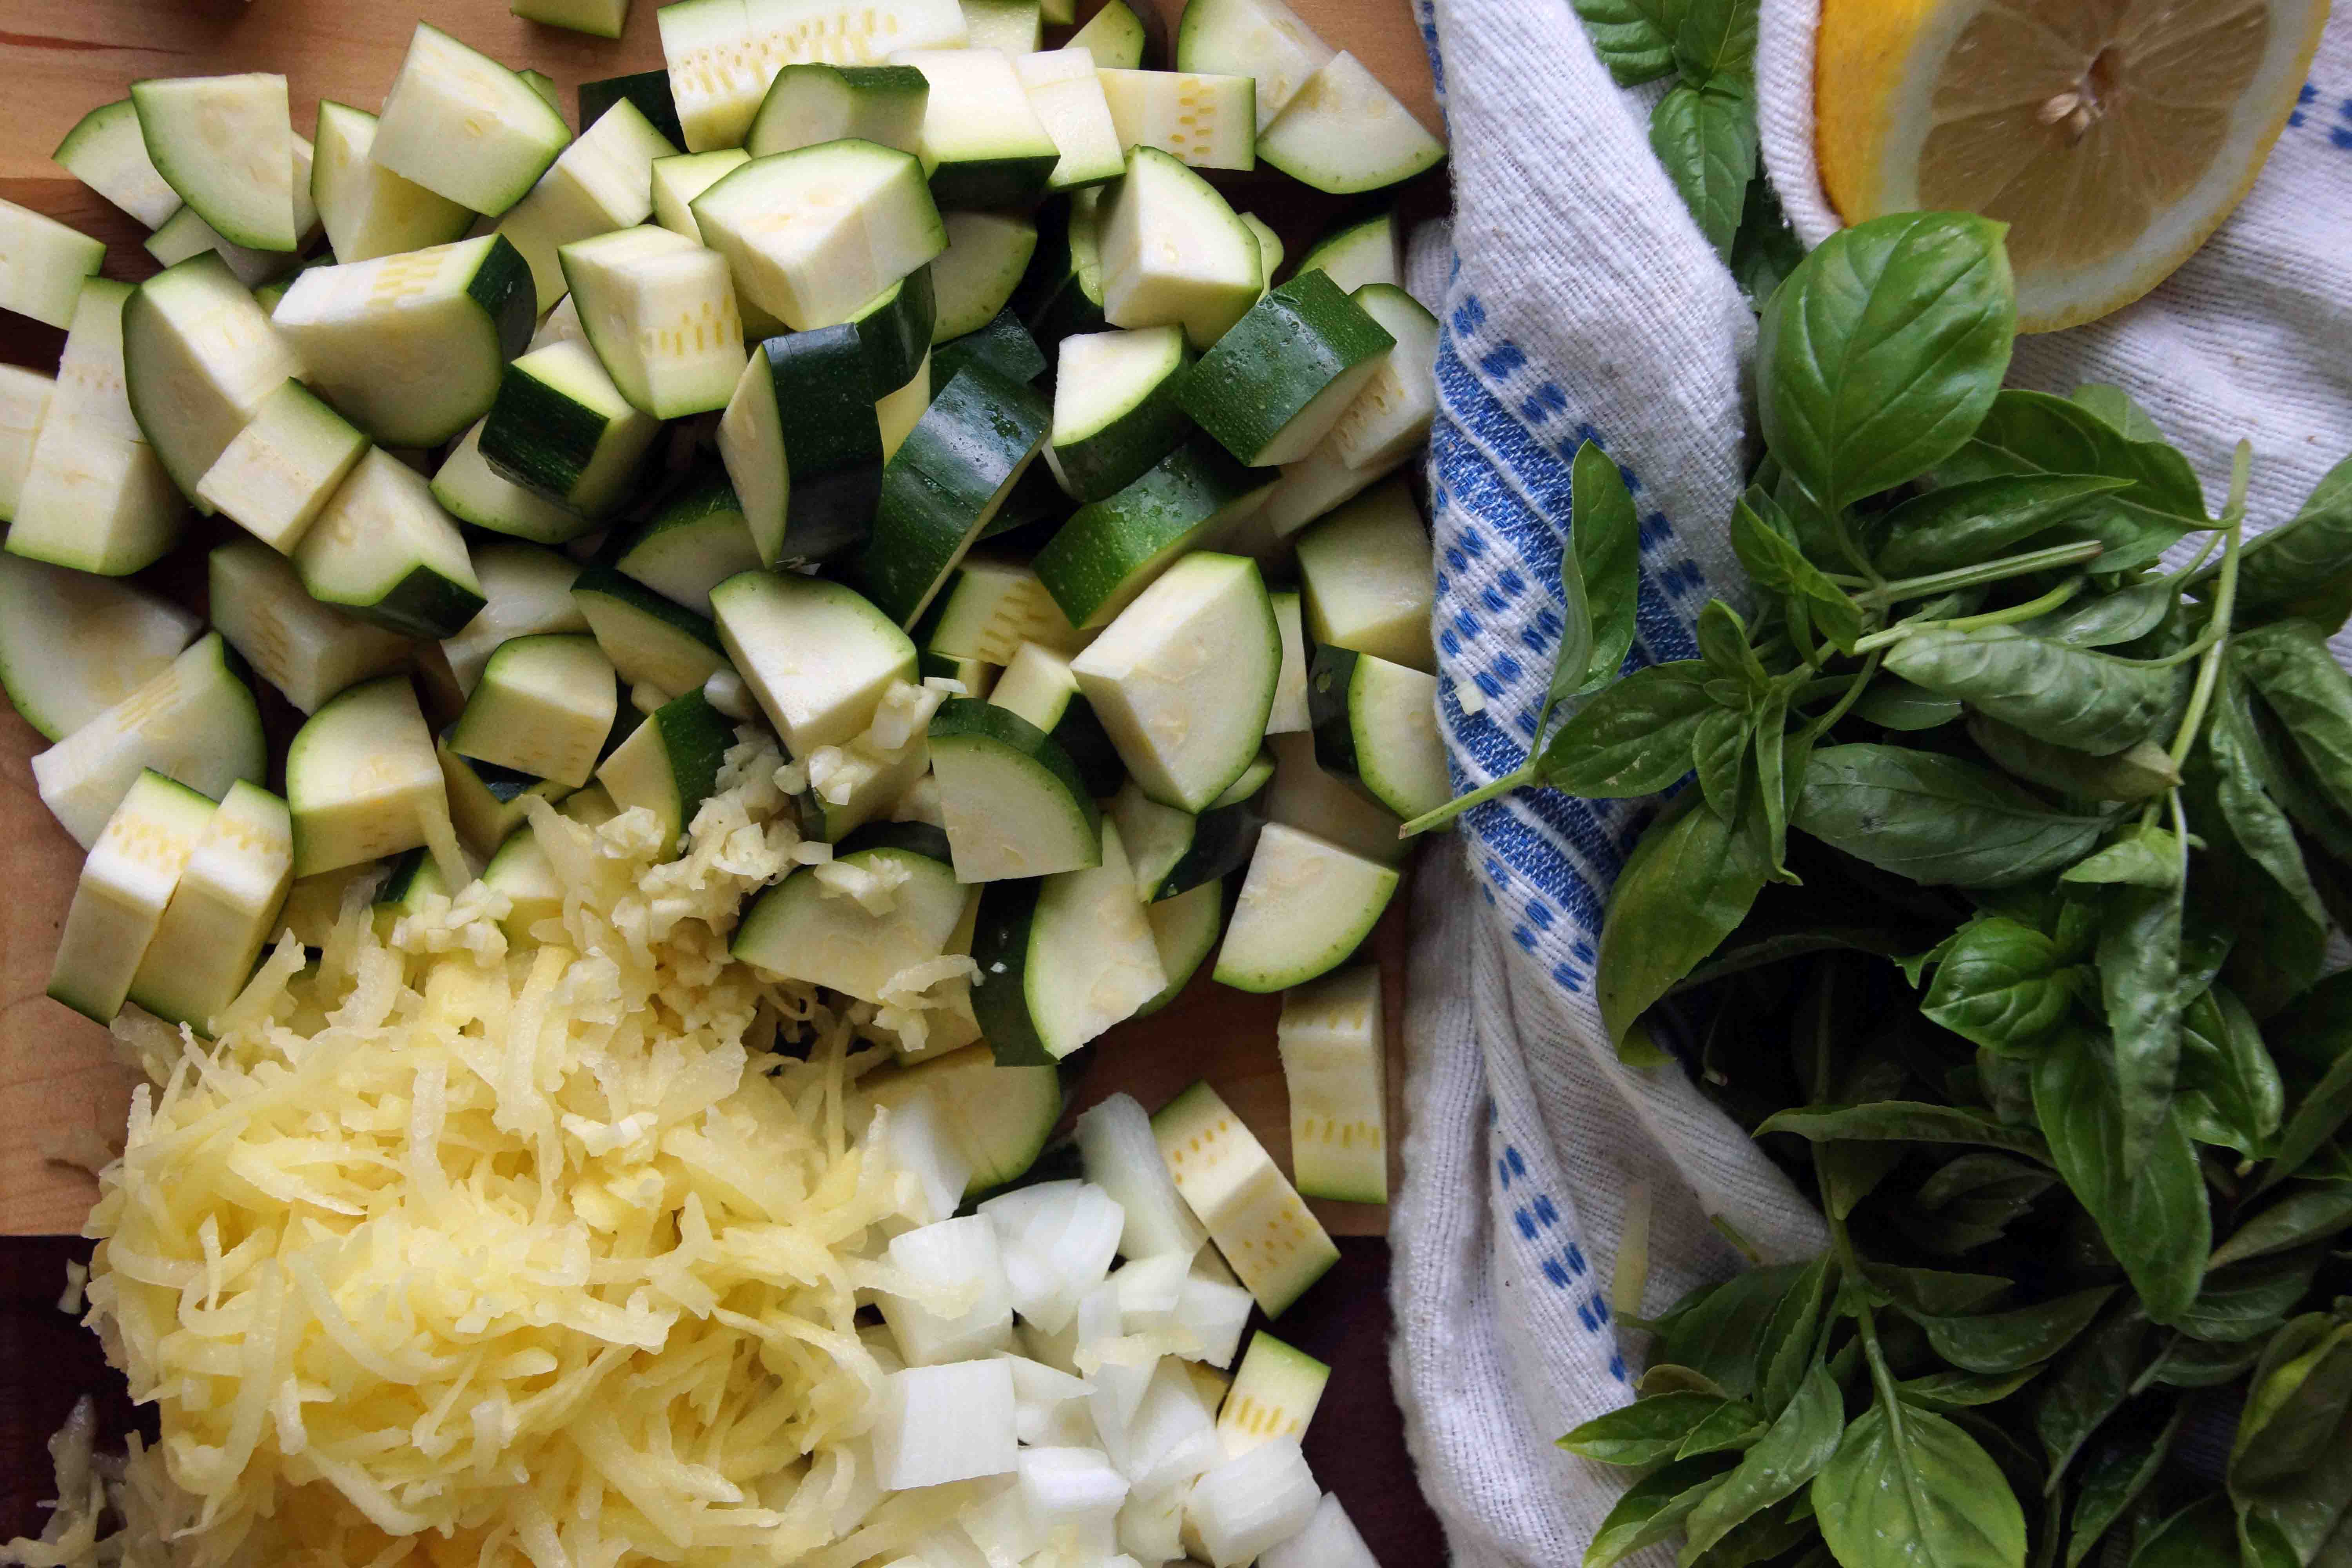 Prepped Ingredients for Zucchini-Basil Soup